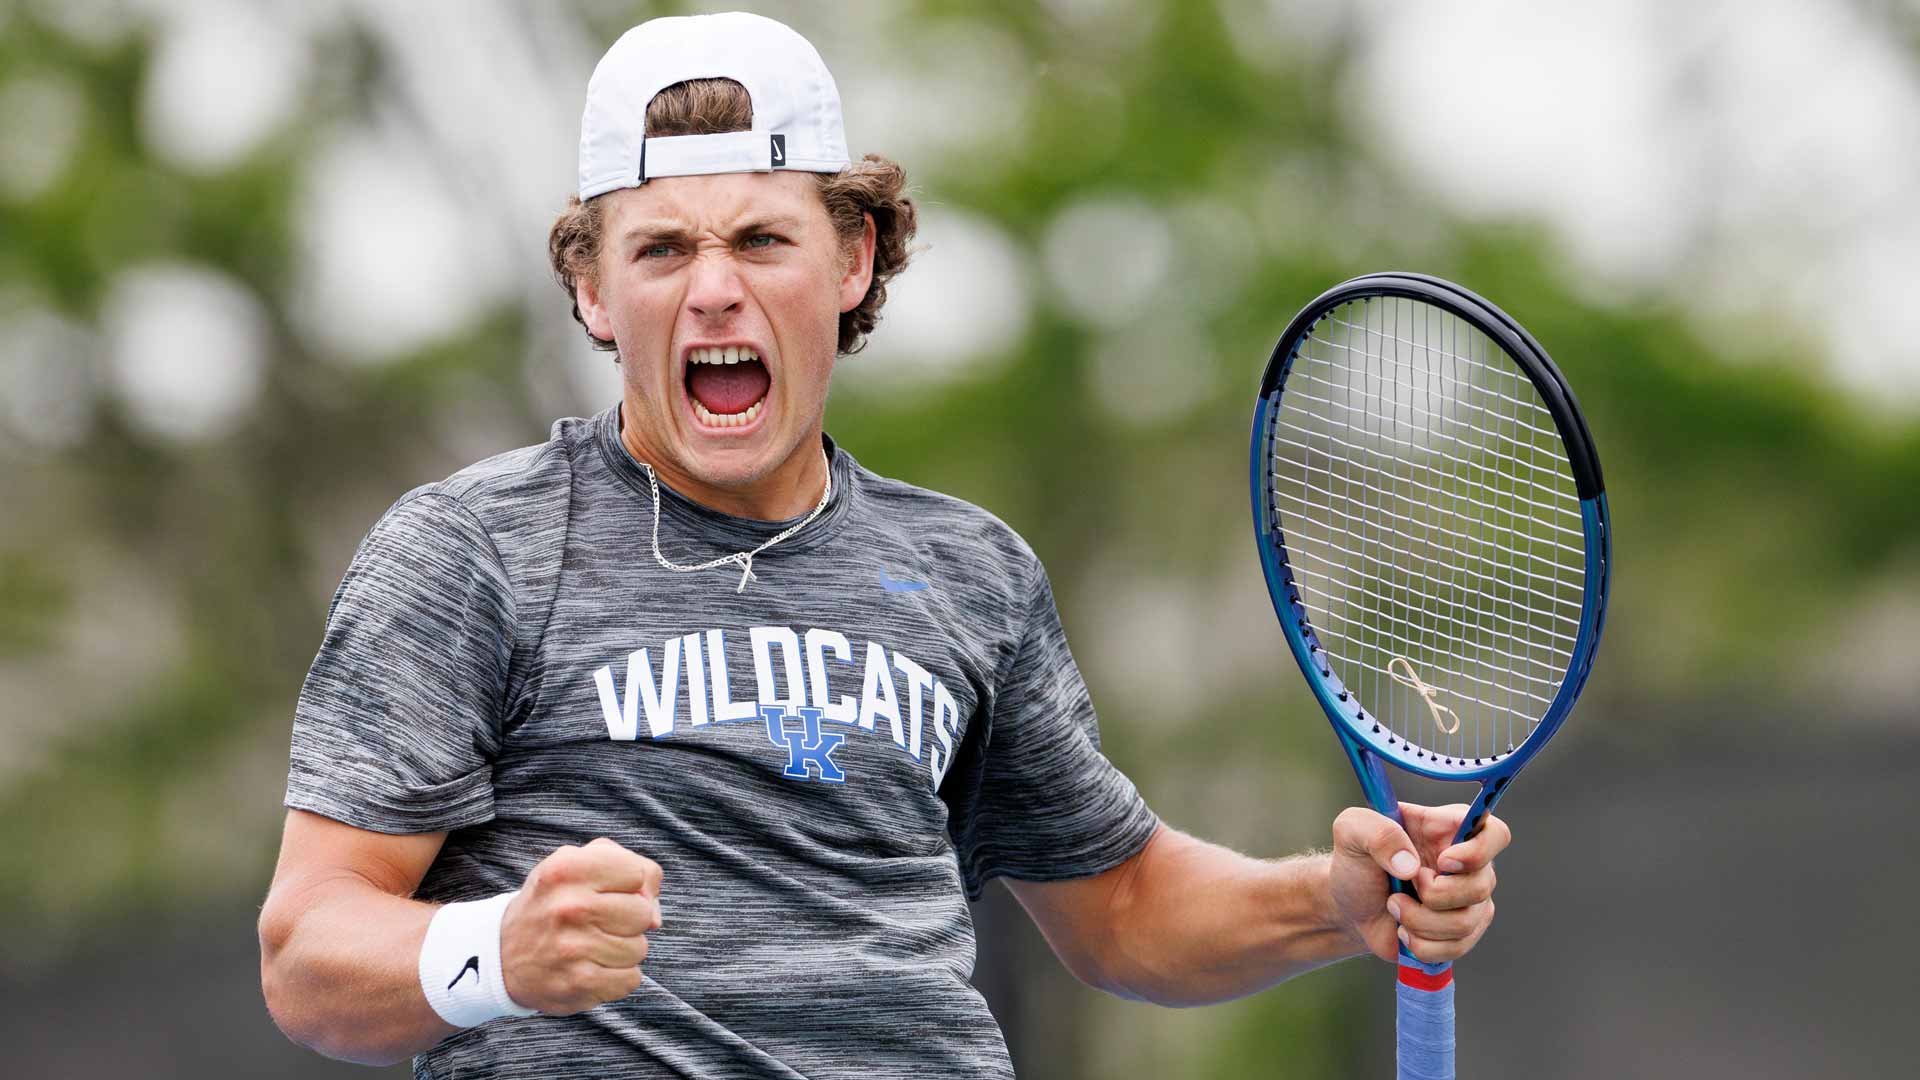 <a href='https://www.atptour.com/en/players/liam-draxl/d0dp/overview'>Liam Draxl</a> was a three-time ITA All-American at the University of Kentucky.